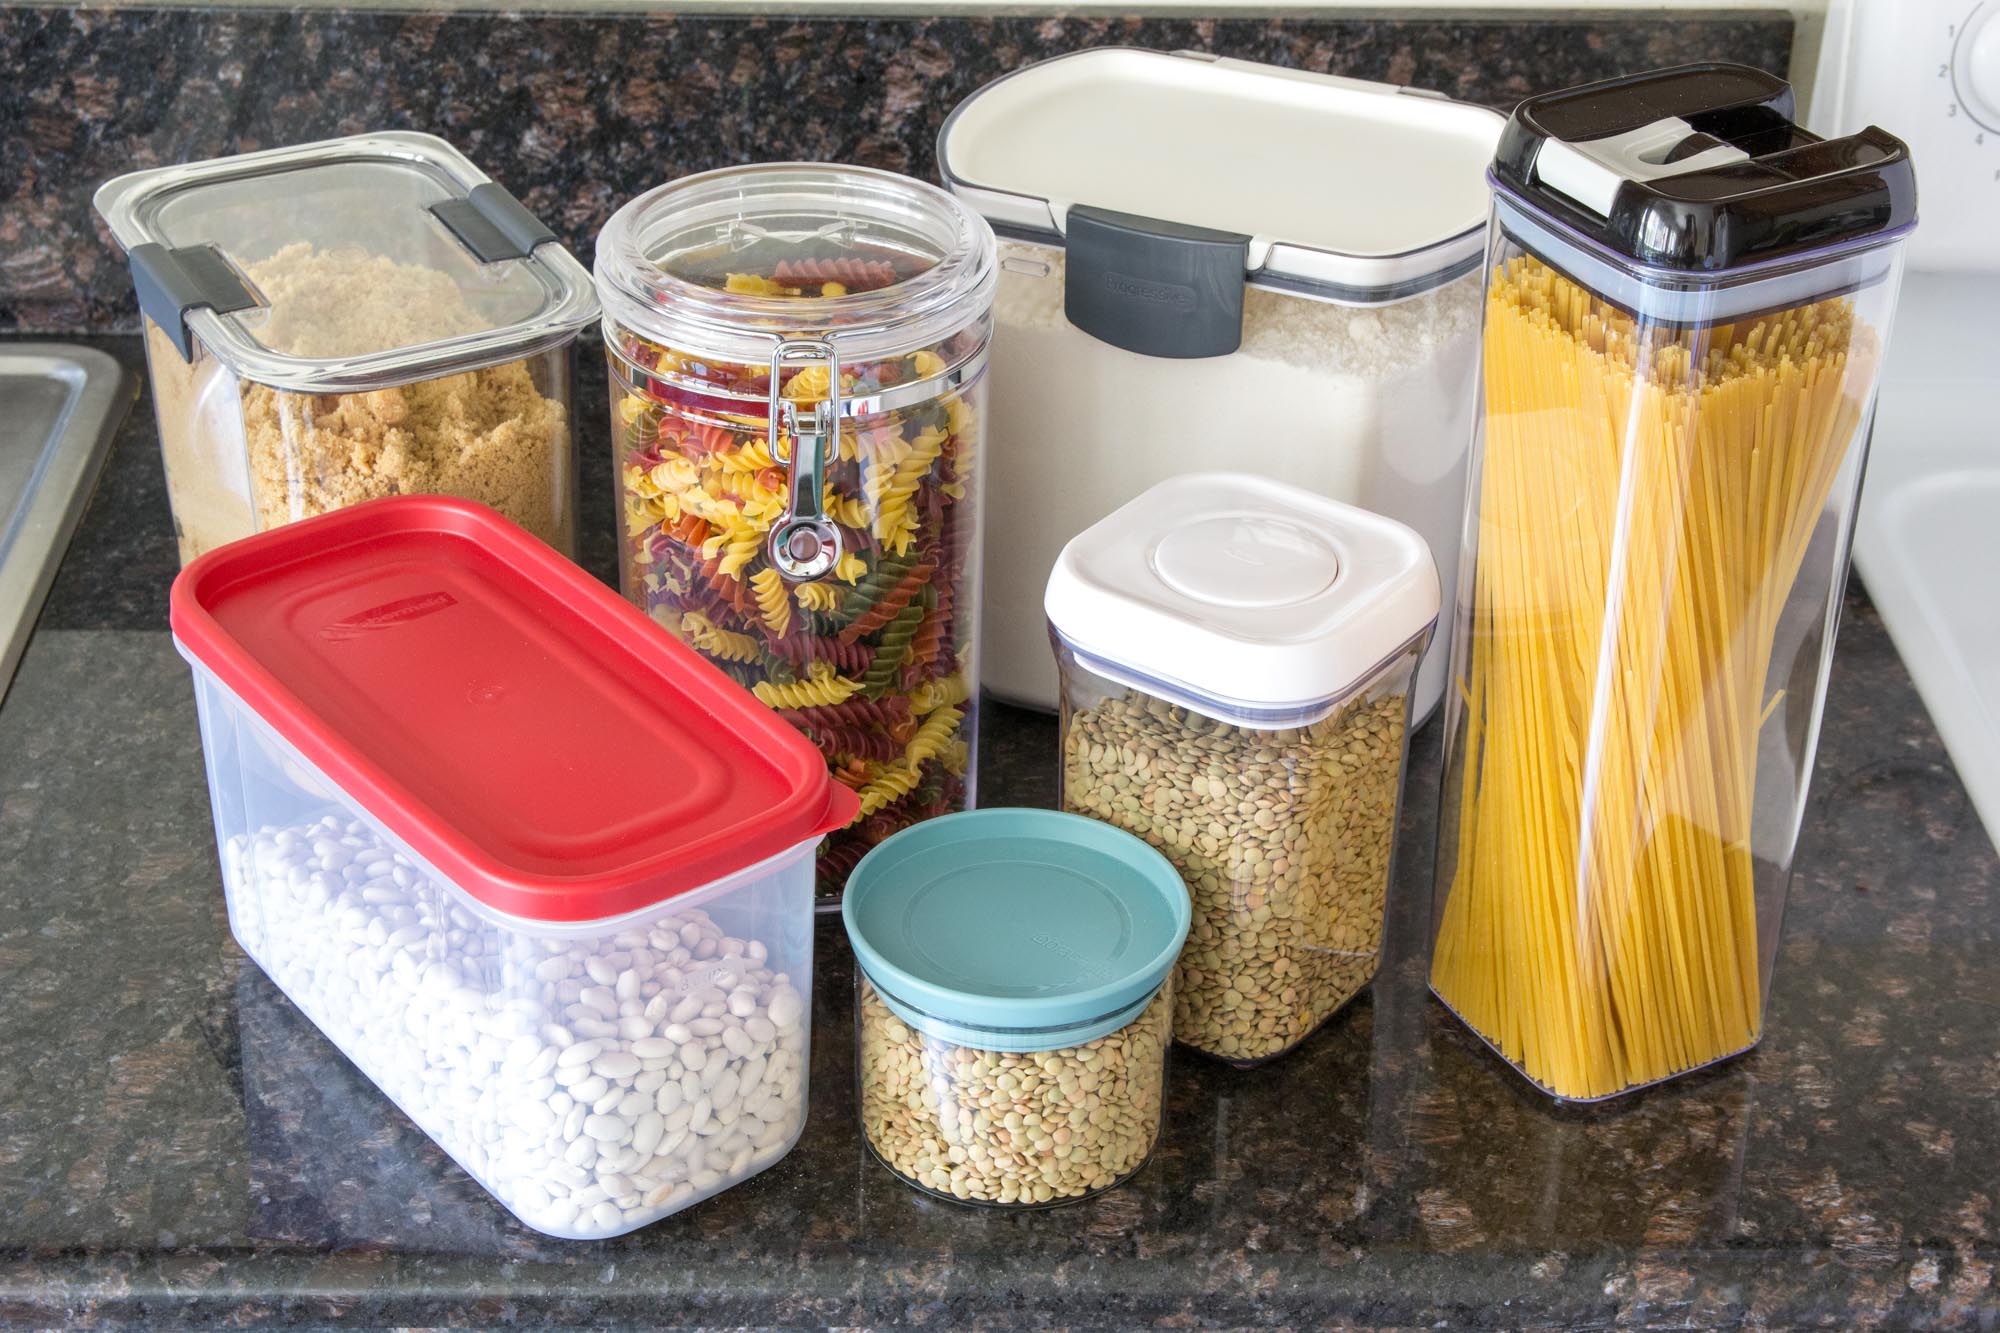 Set Of 3 Large Cereal & Dry Food Storage Containers BPA-Free Plastic Container